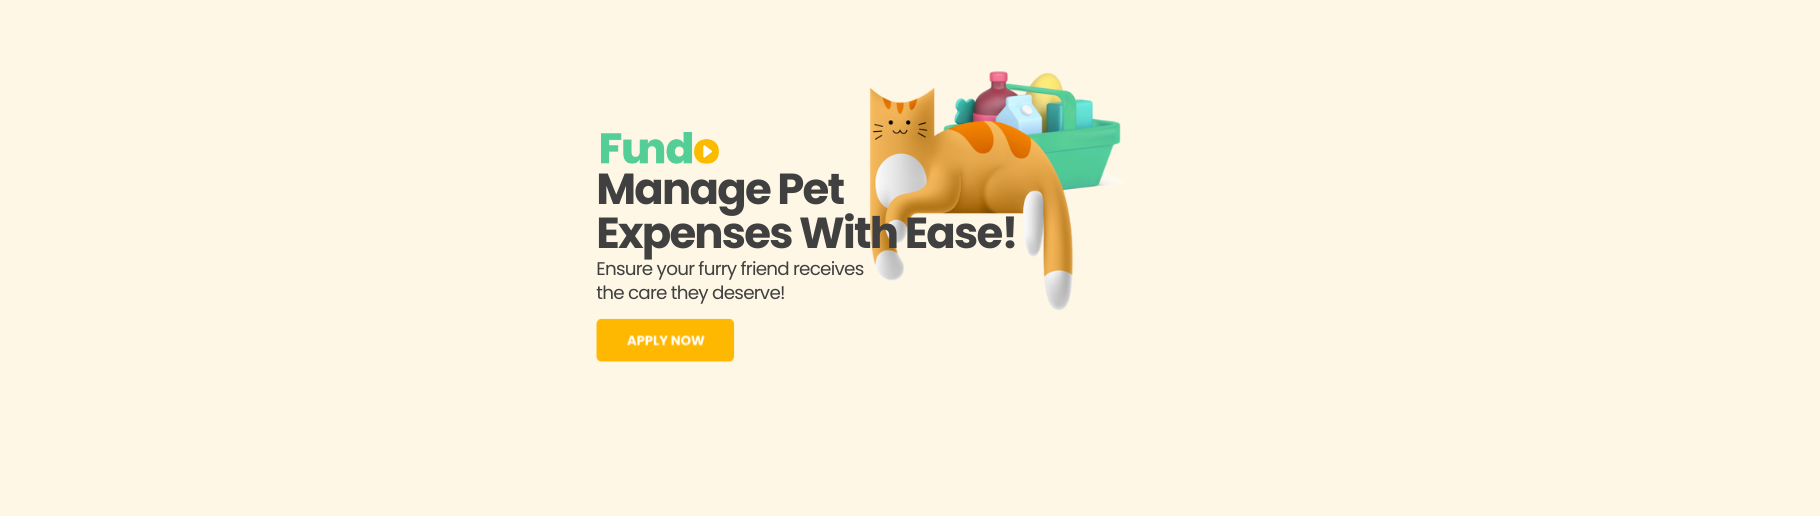 How to Manage Pet Expenses